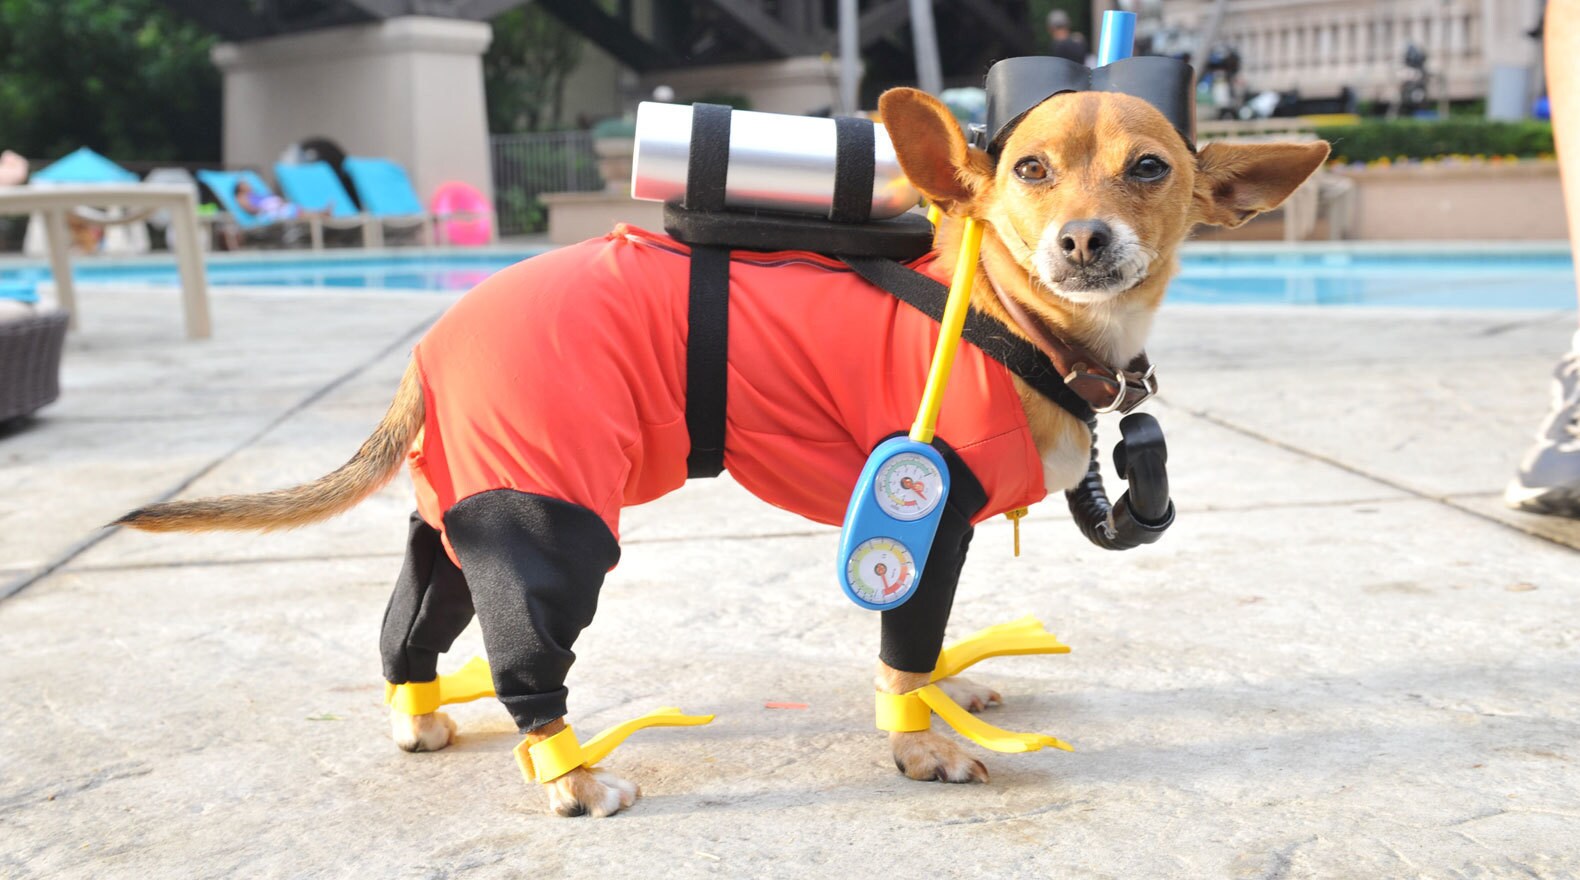 Papi the chihuahua dressed in scuba gear at the hotel swimming pool